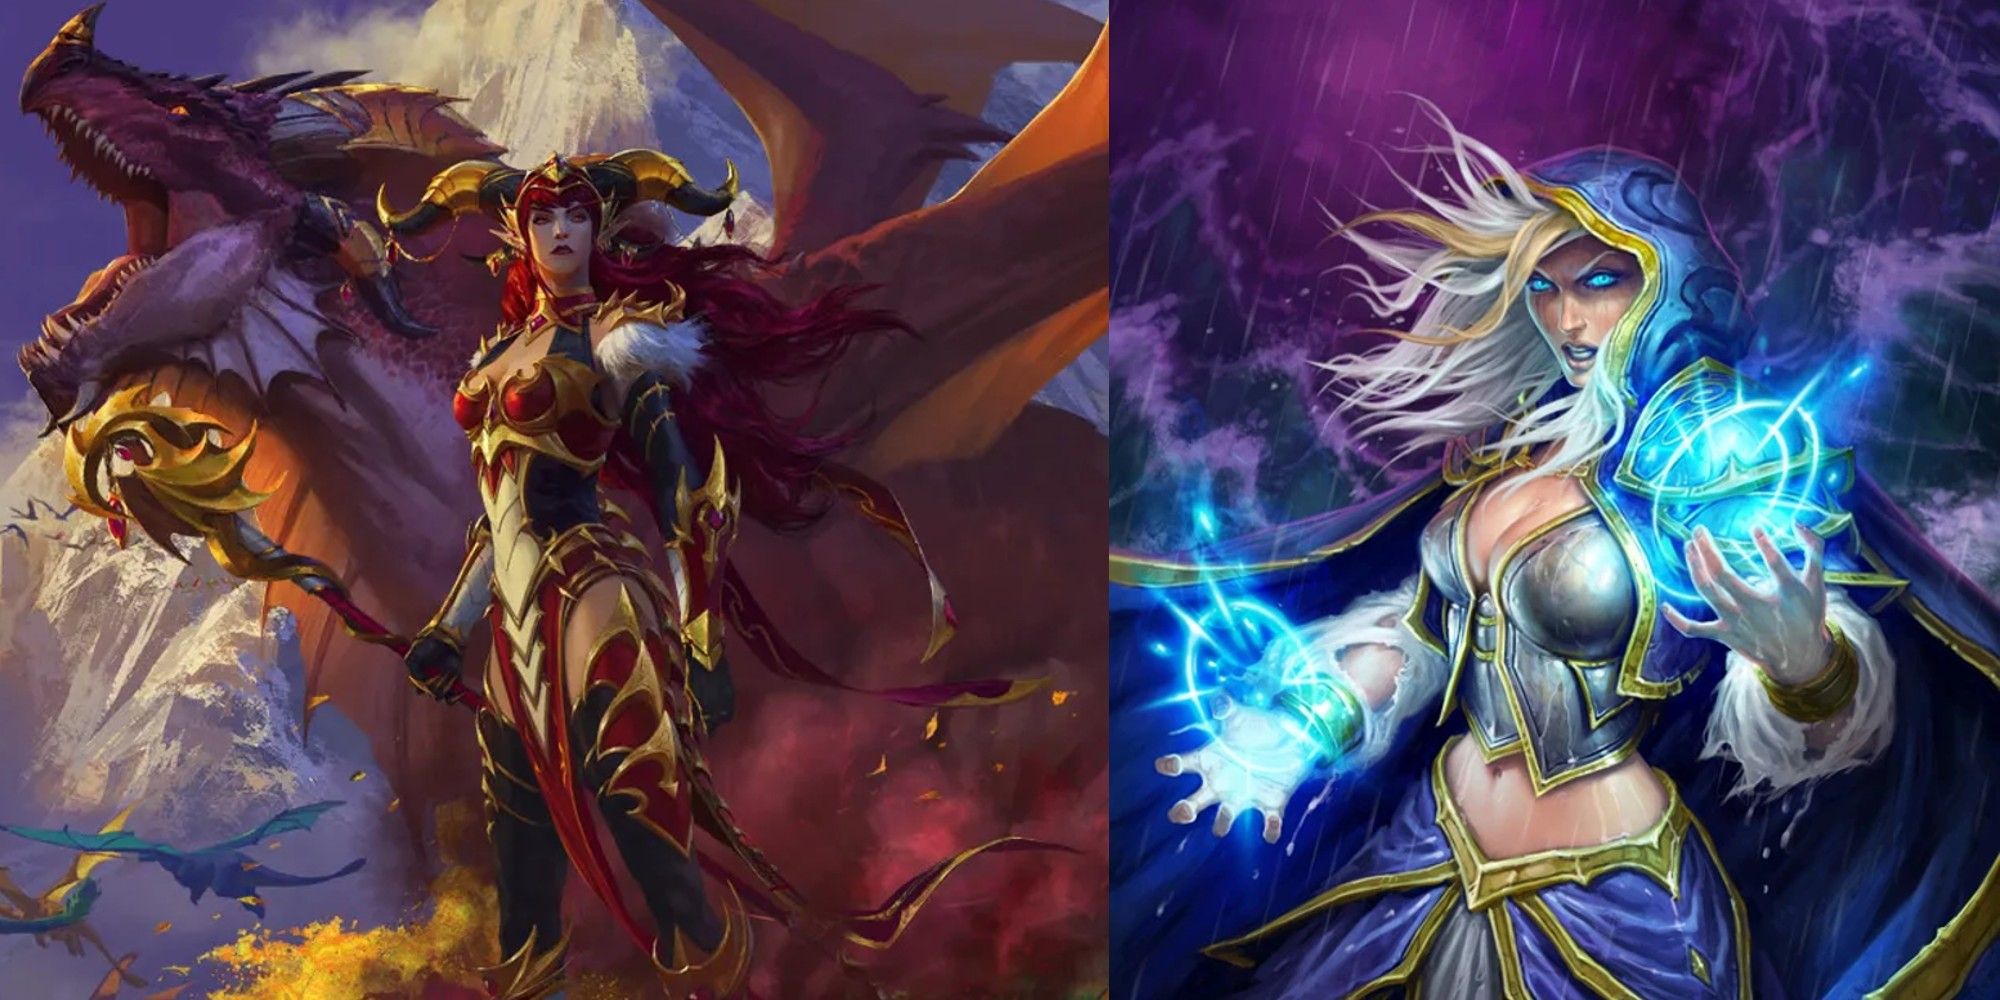 The Official Art of World of Warcraft, depicted alongside Jaina Proudmoore, a Frost Mage.